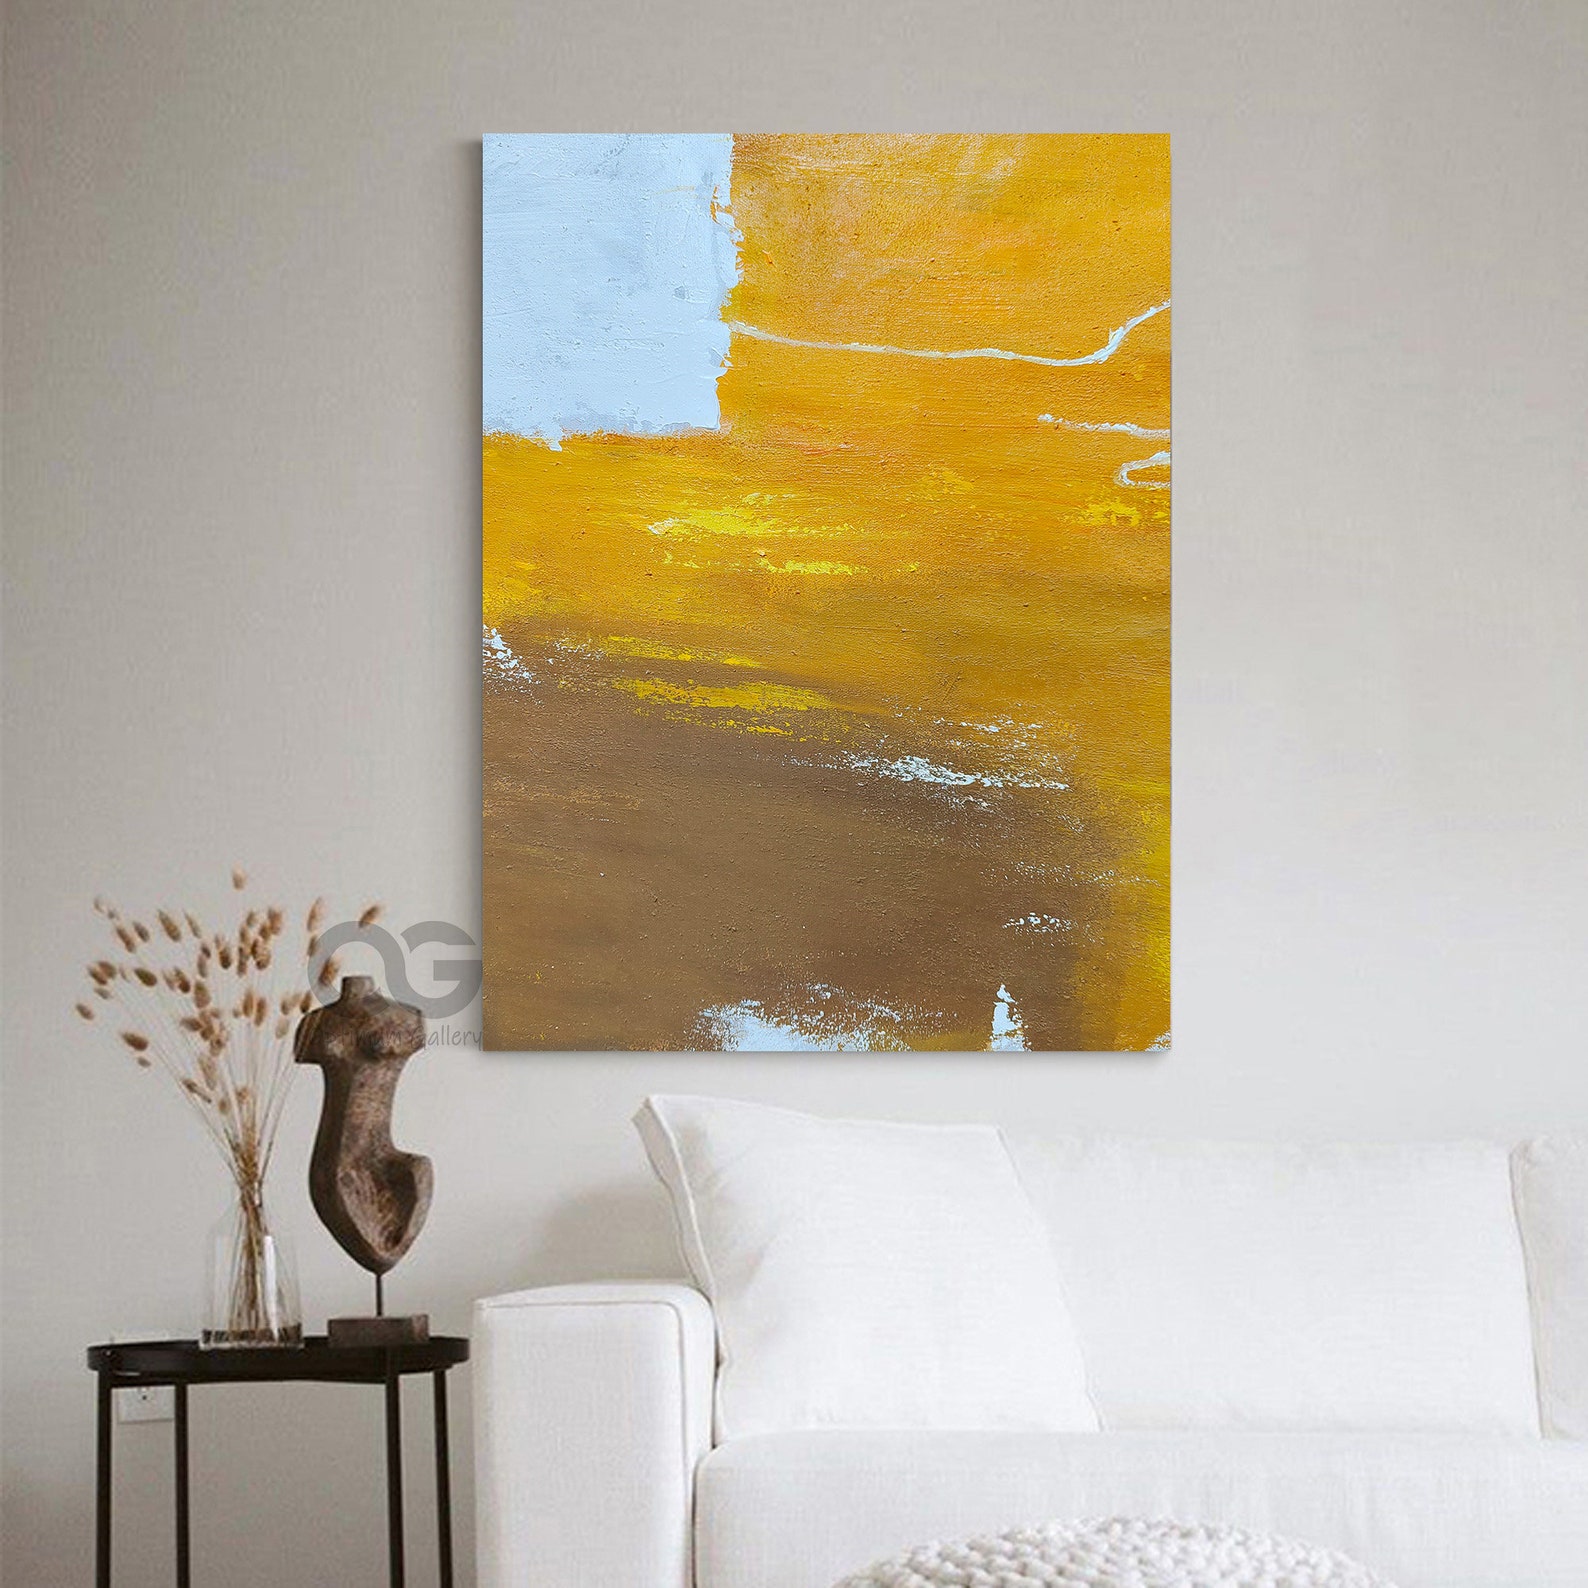 Large Abstract Minimalist Painting Original Yellow And Brown | Etsy